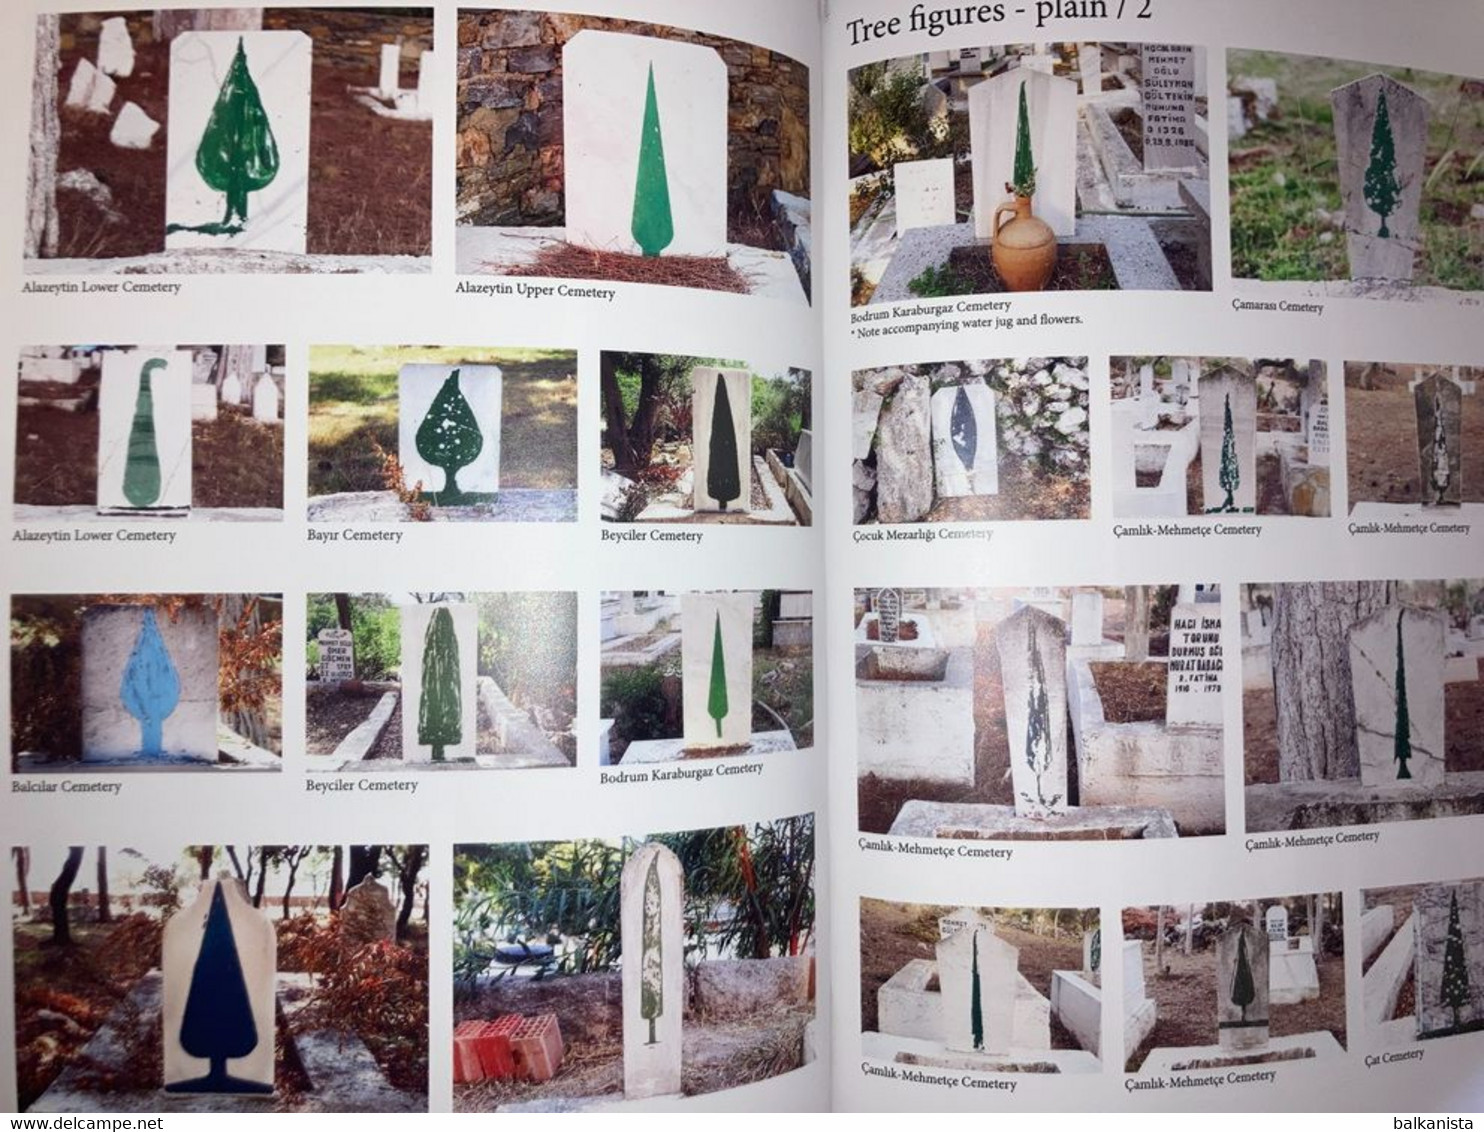 Forests Of The Afterlife Folk Art And Symbolism In Village Cemeteries Of Turkey - Antigua